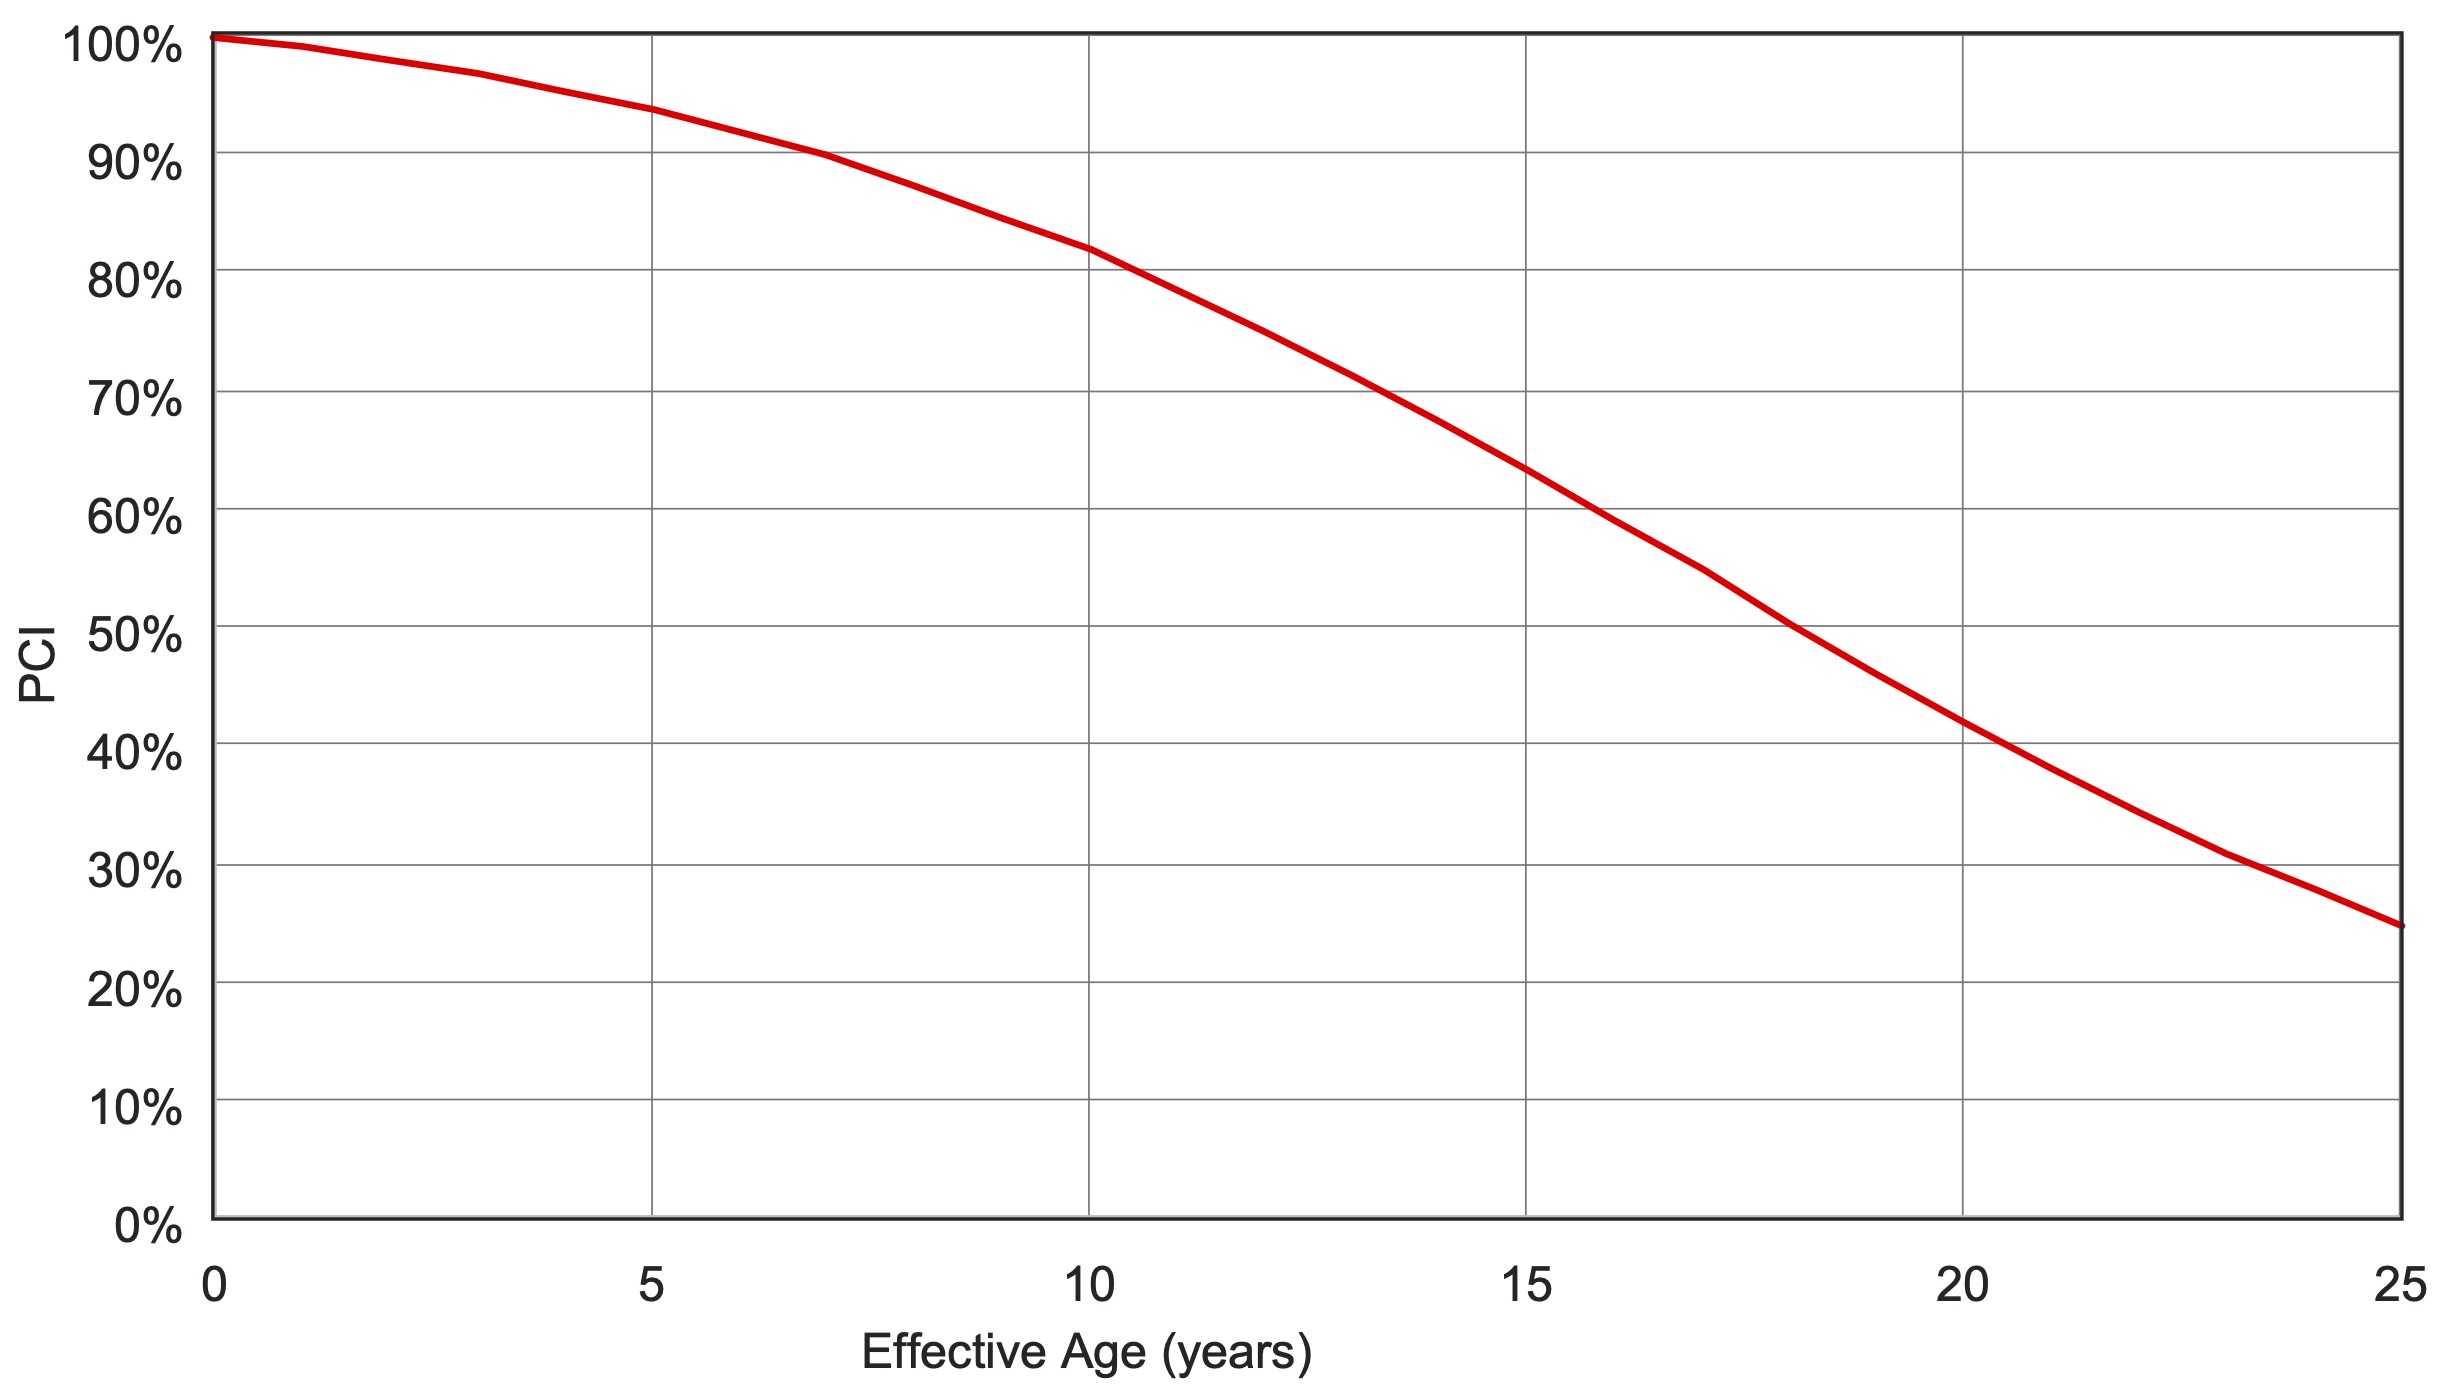 Graph with effective age on the x-axis and PCI on the y-axis that depicts the pavement deterioration curve over time